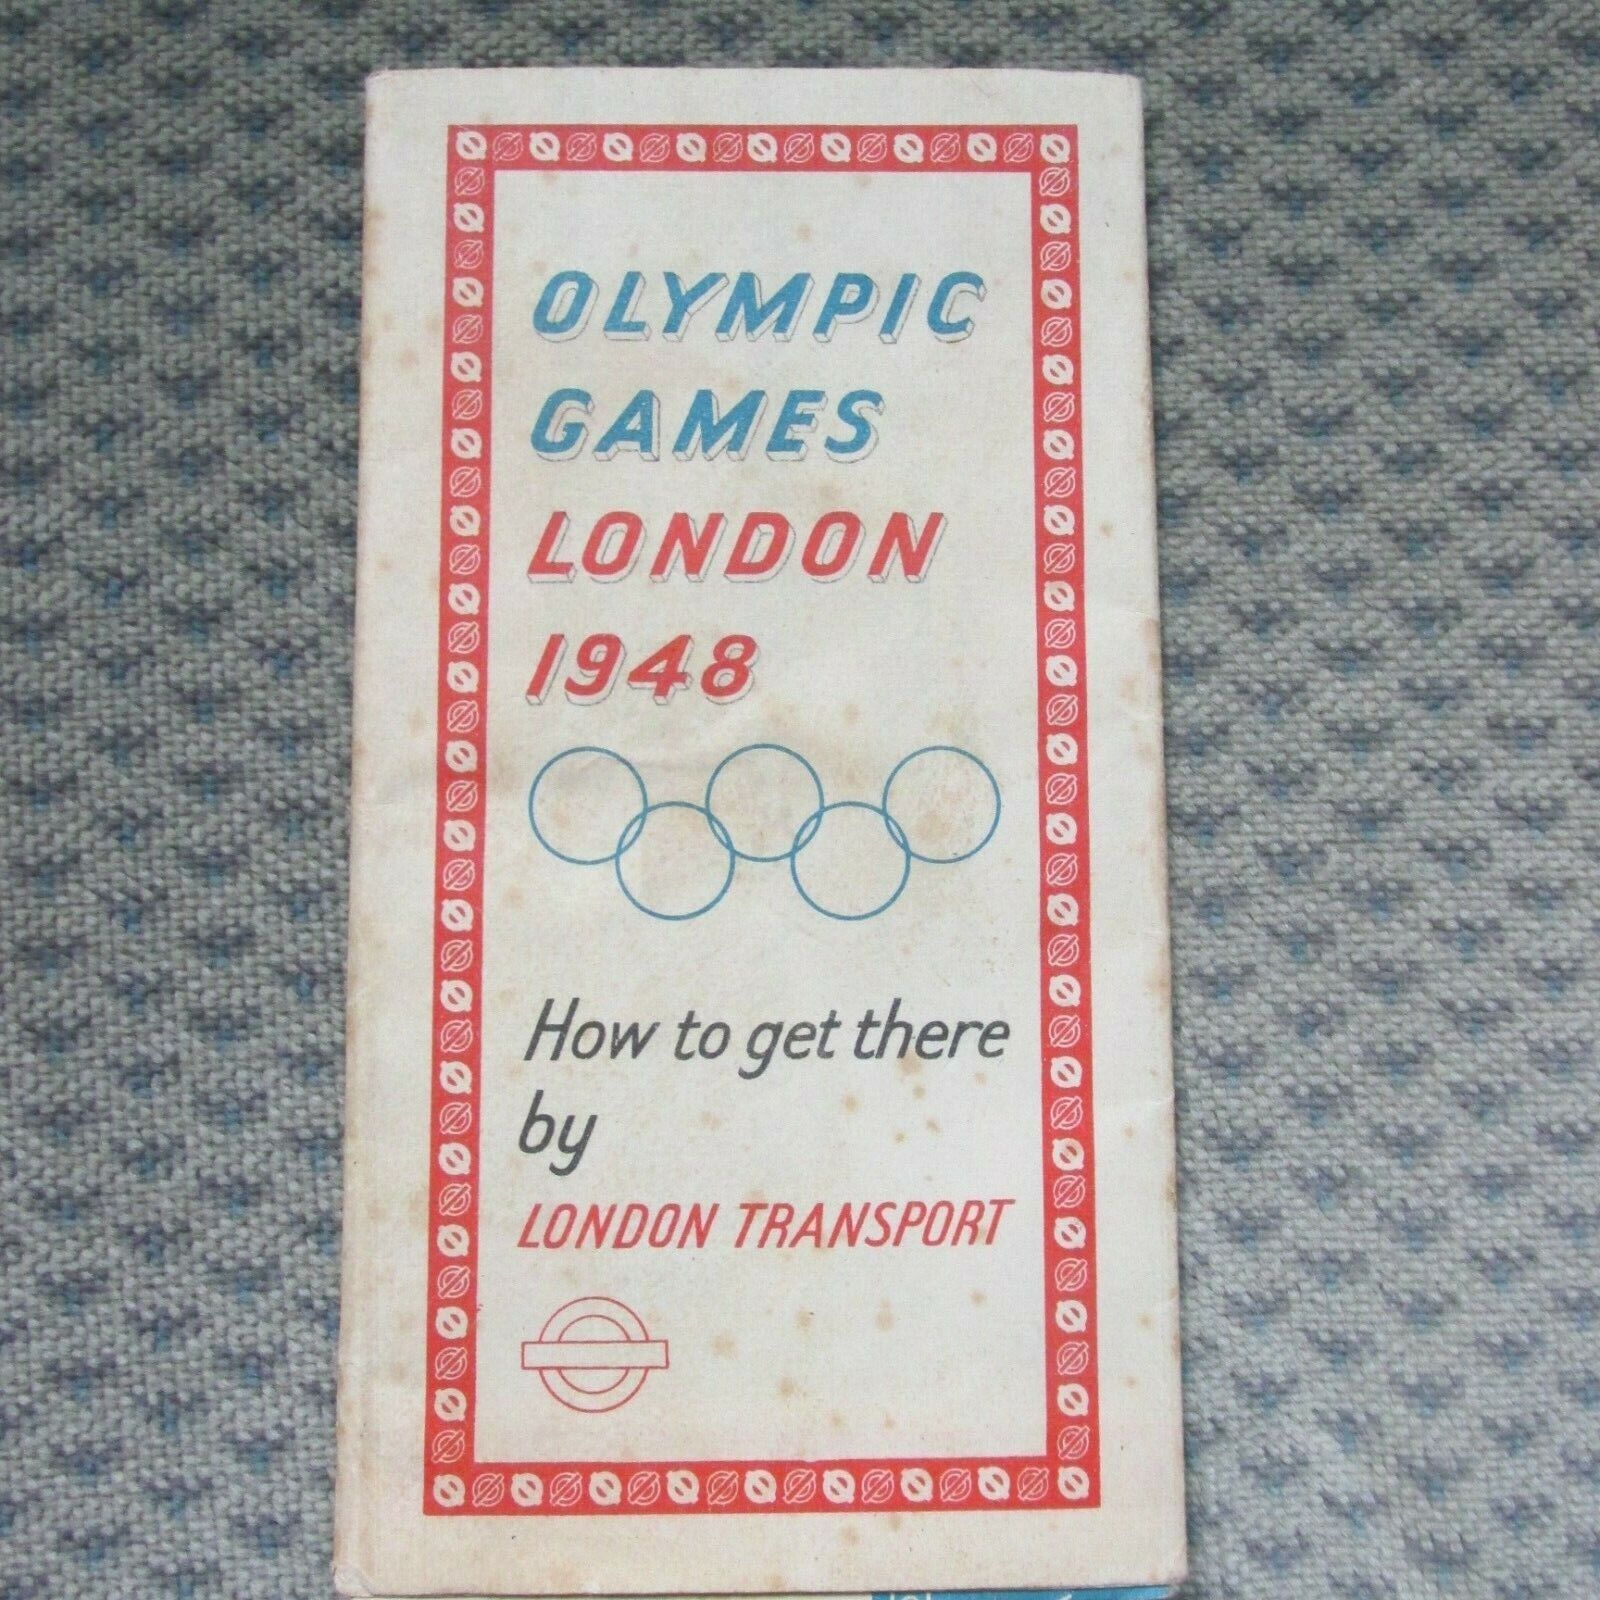 1948 Olympic Games, London Transport, How to get there